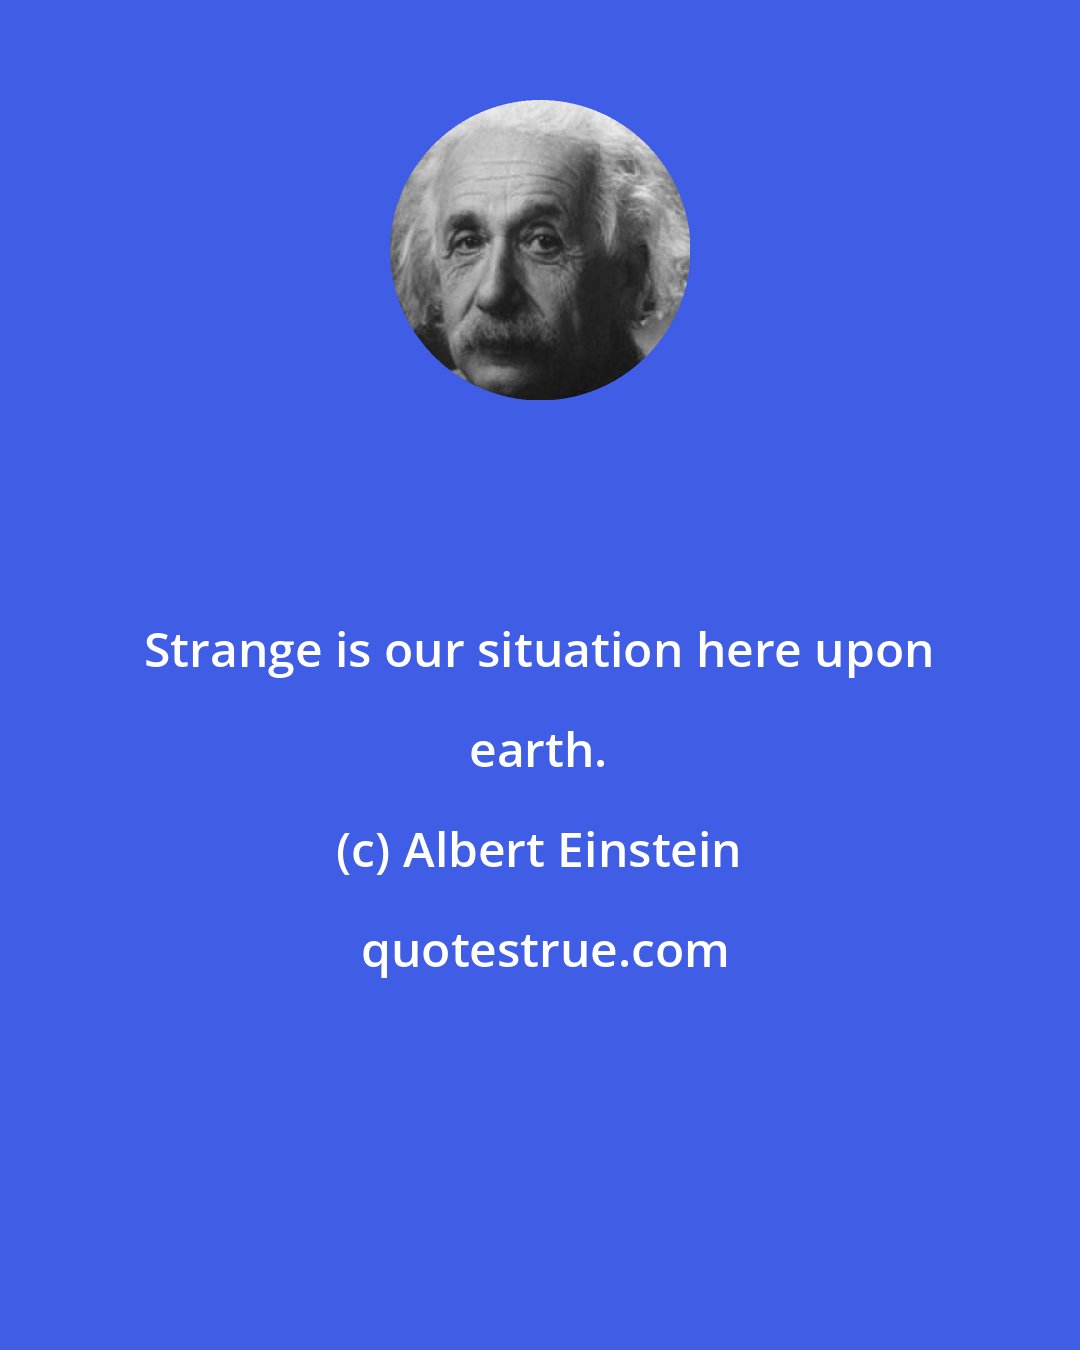 Albert Einstein: Strange is our situation here upon earth.